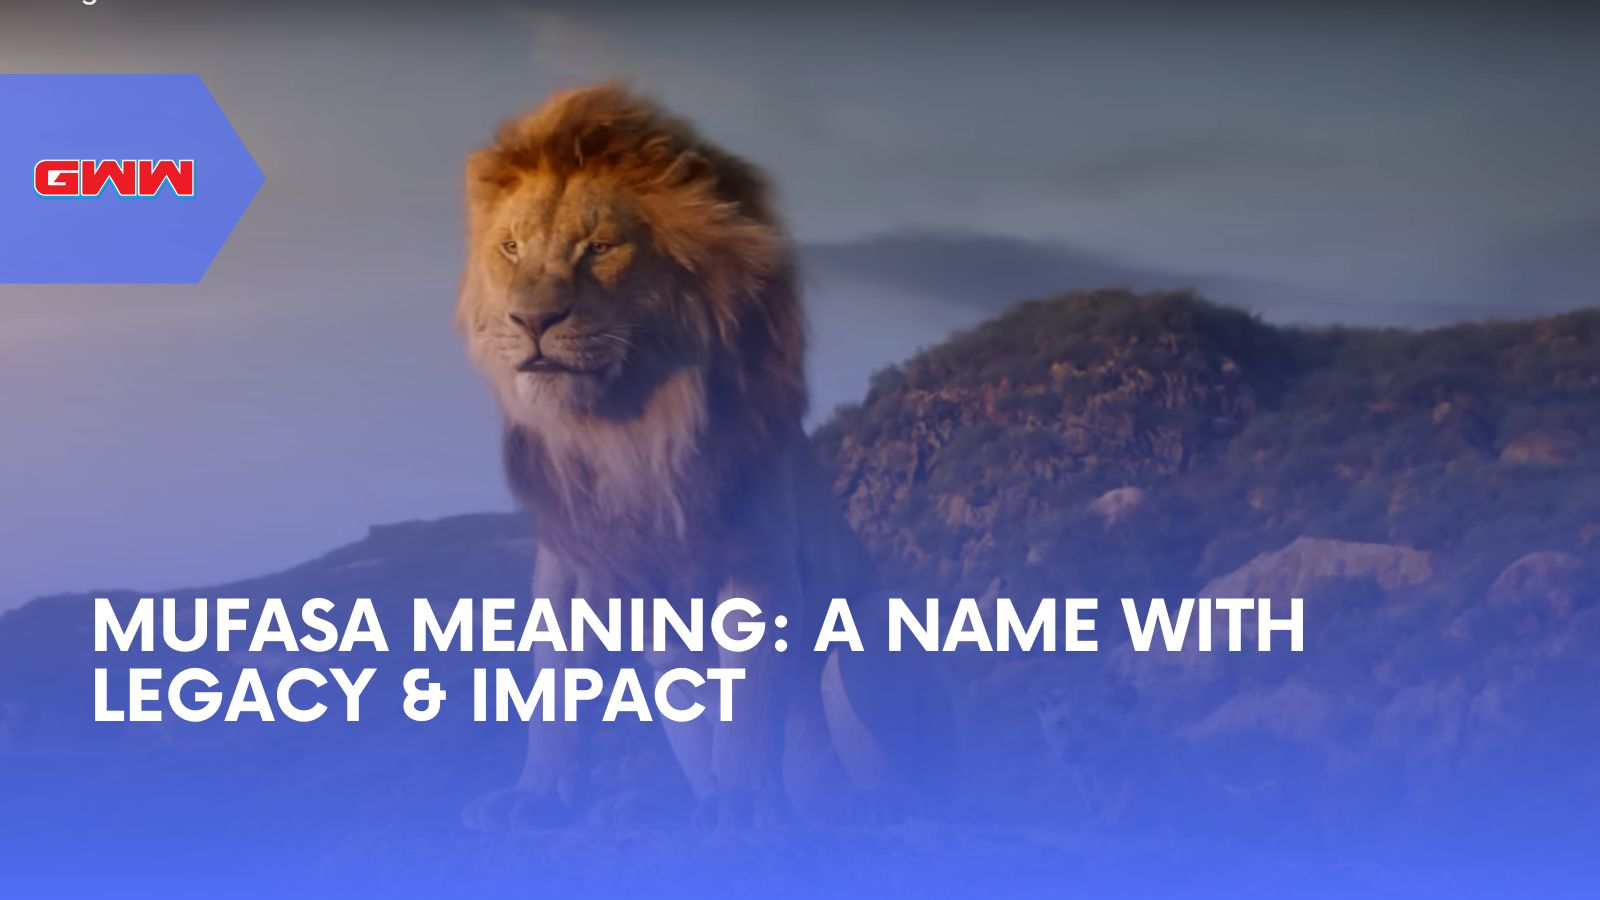 Mufasa Meaning: Name with Legacy & Impact